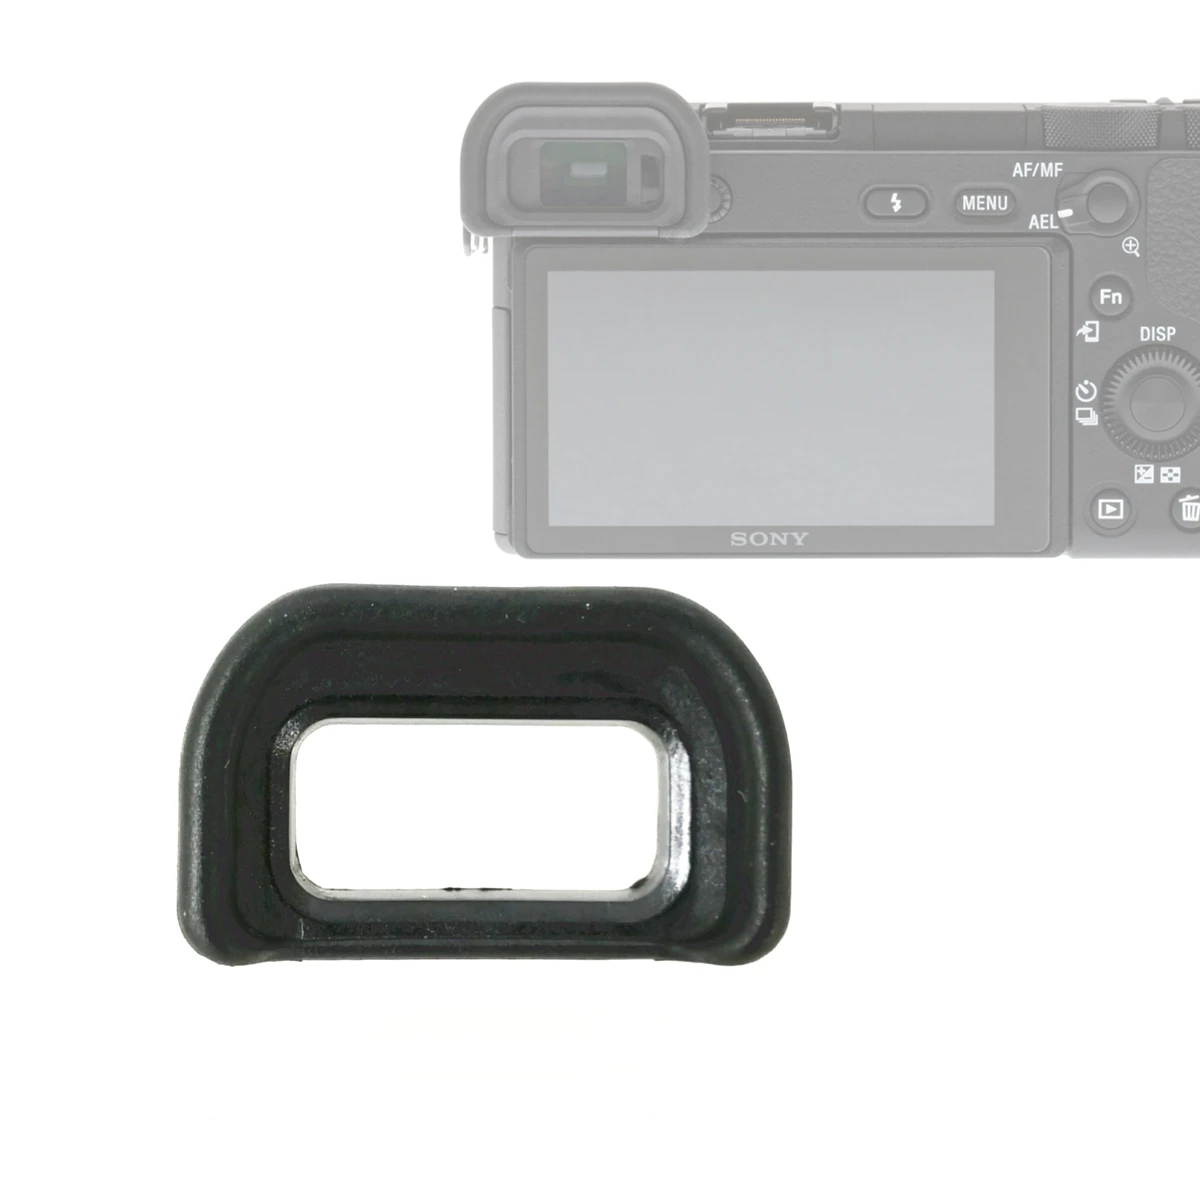 Hard / Soft Viewfinder Eyecup Eye Cup Eyepiece replace FDA-EP17 for Sony A6600 A6500 A6400 ILCE-6600 ILCE-6500 EP17